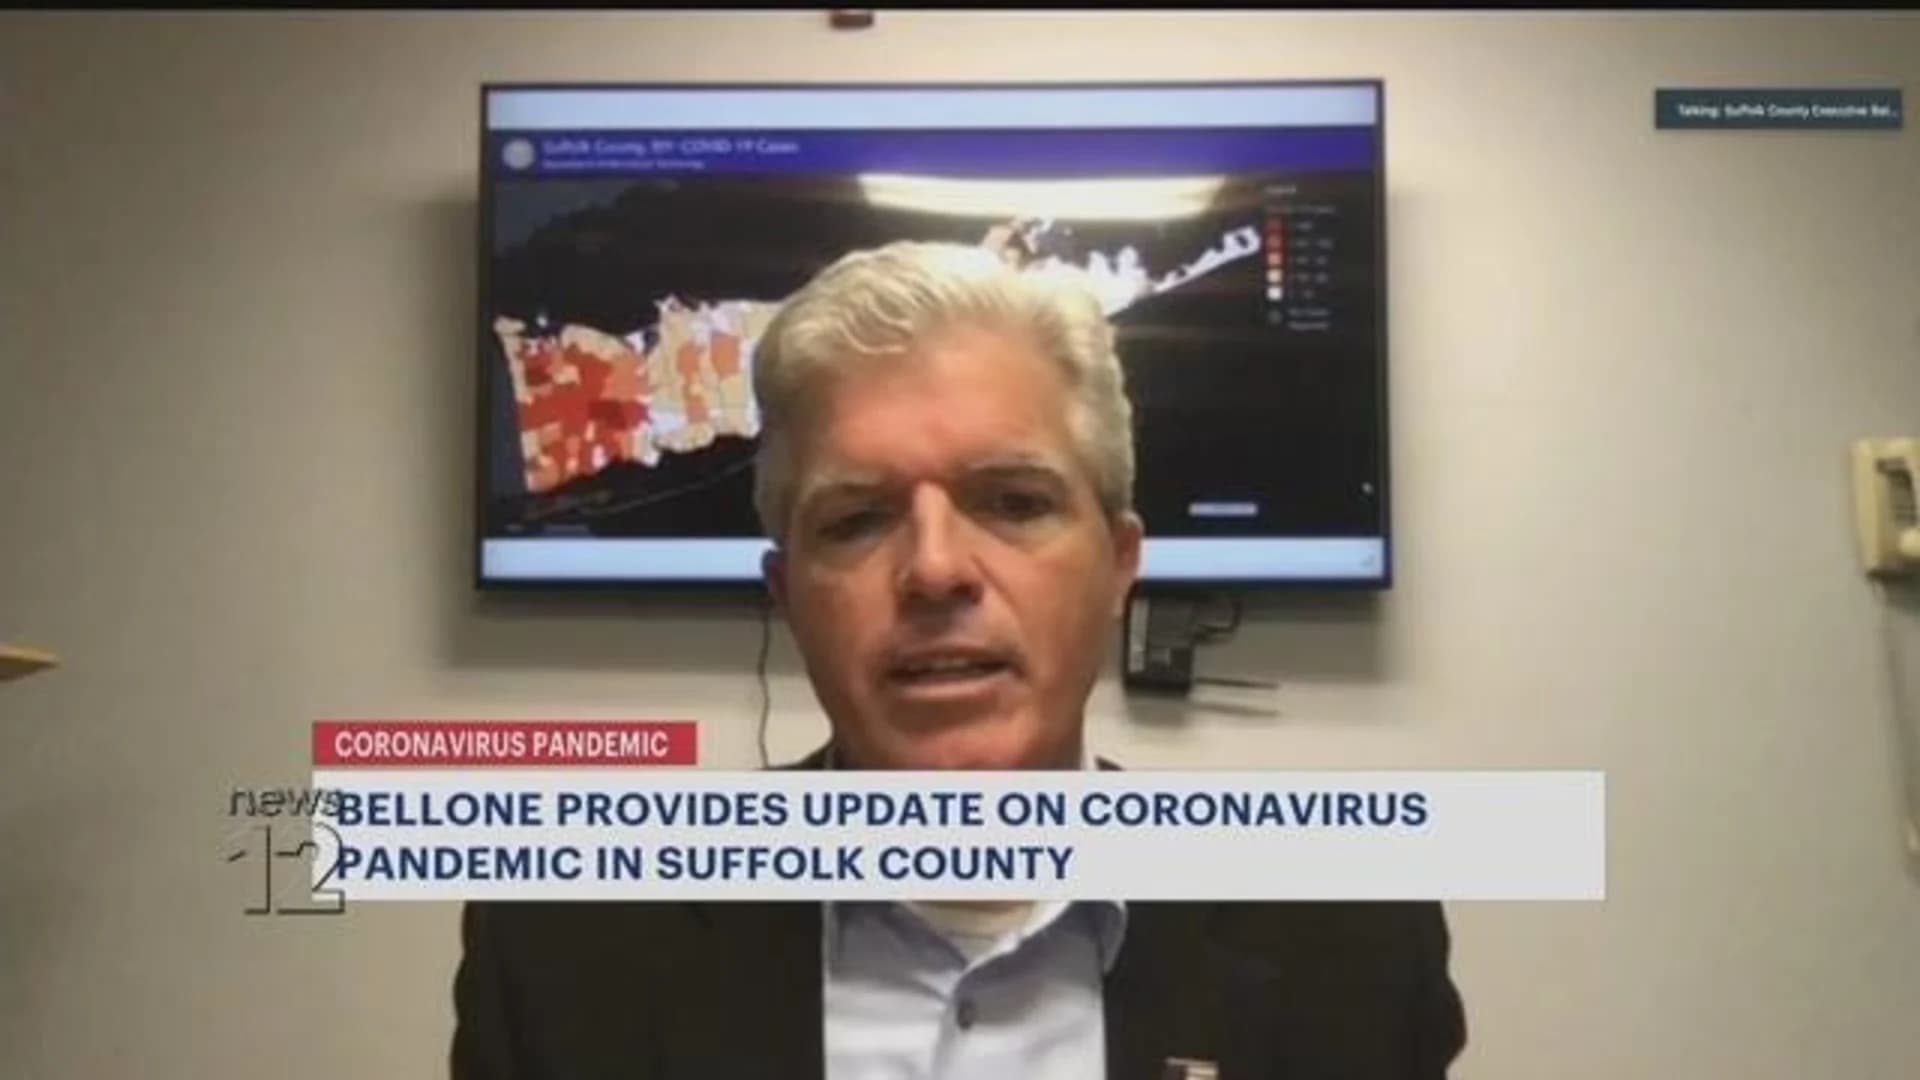 Suffolk Executive Bellone: 5,023 coronavirus cases reported in county, with 40 virus-related deaths